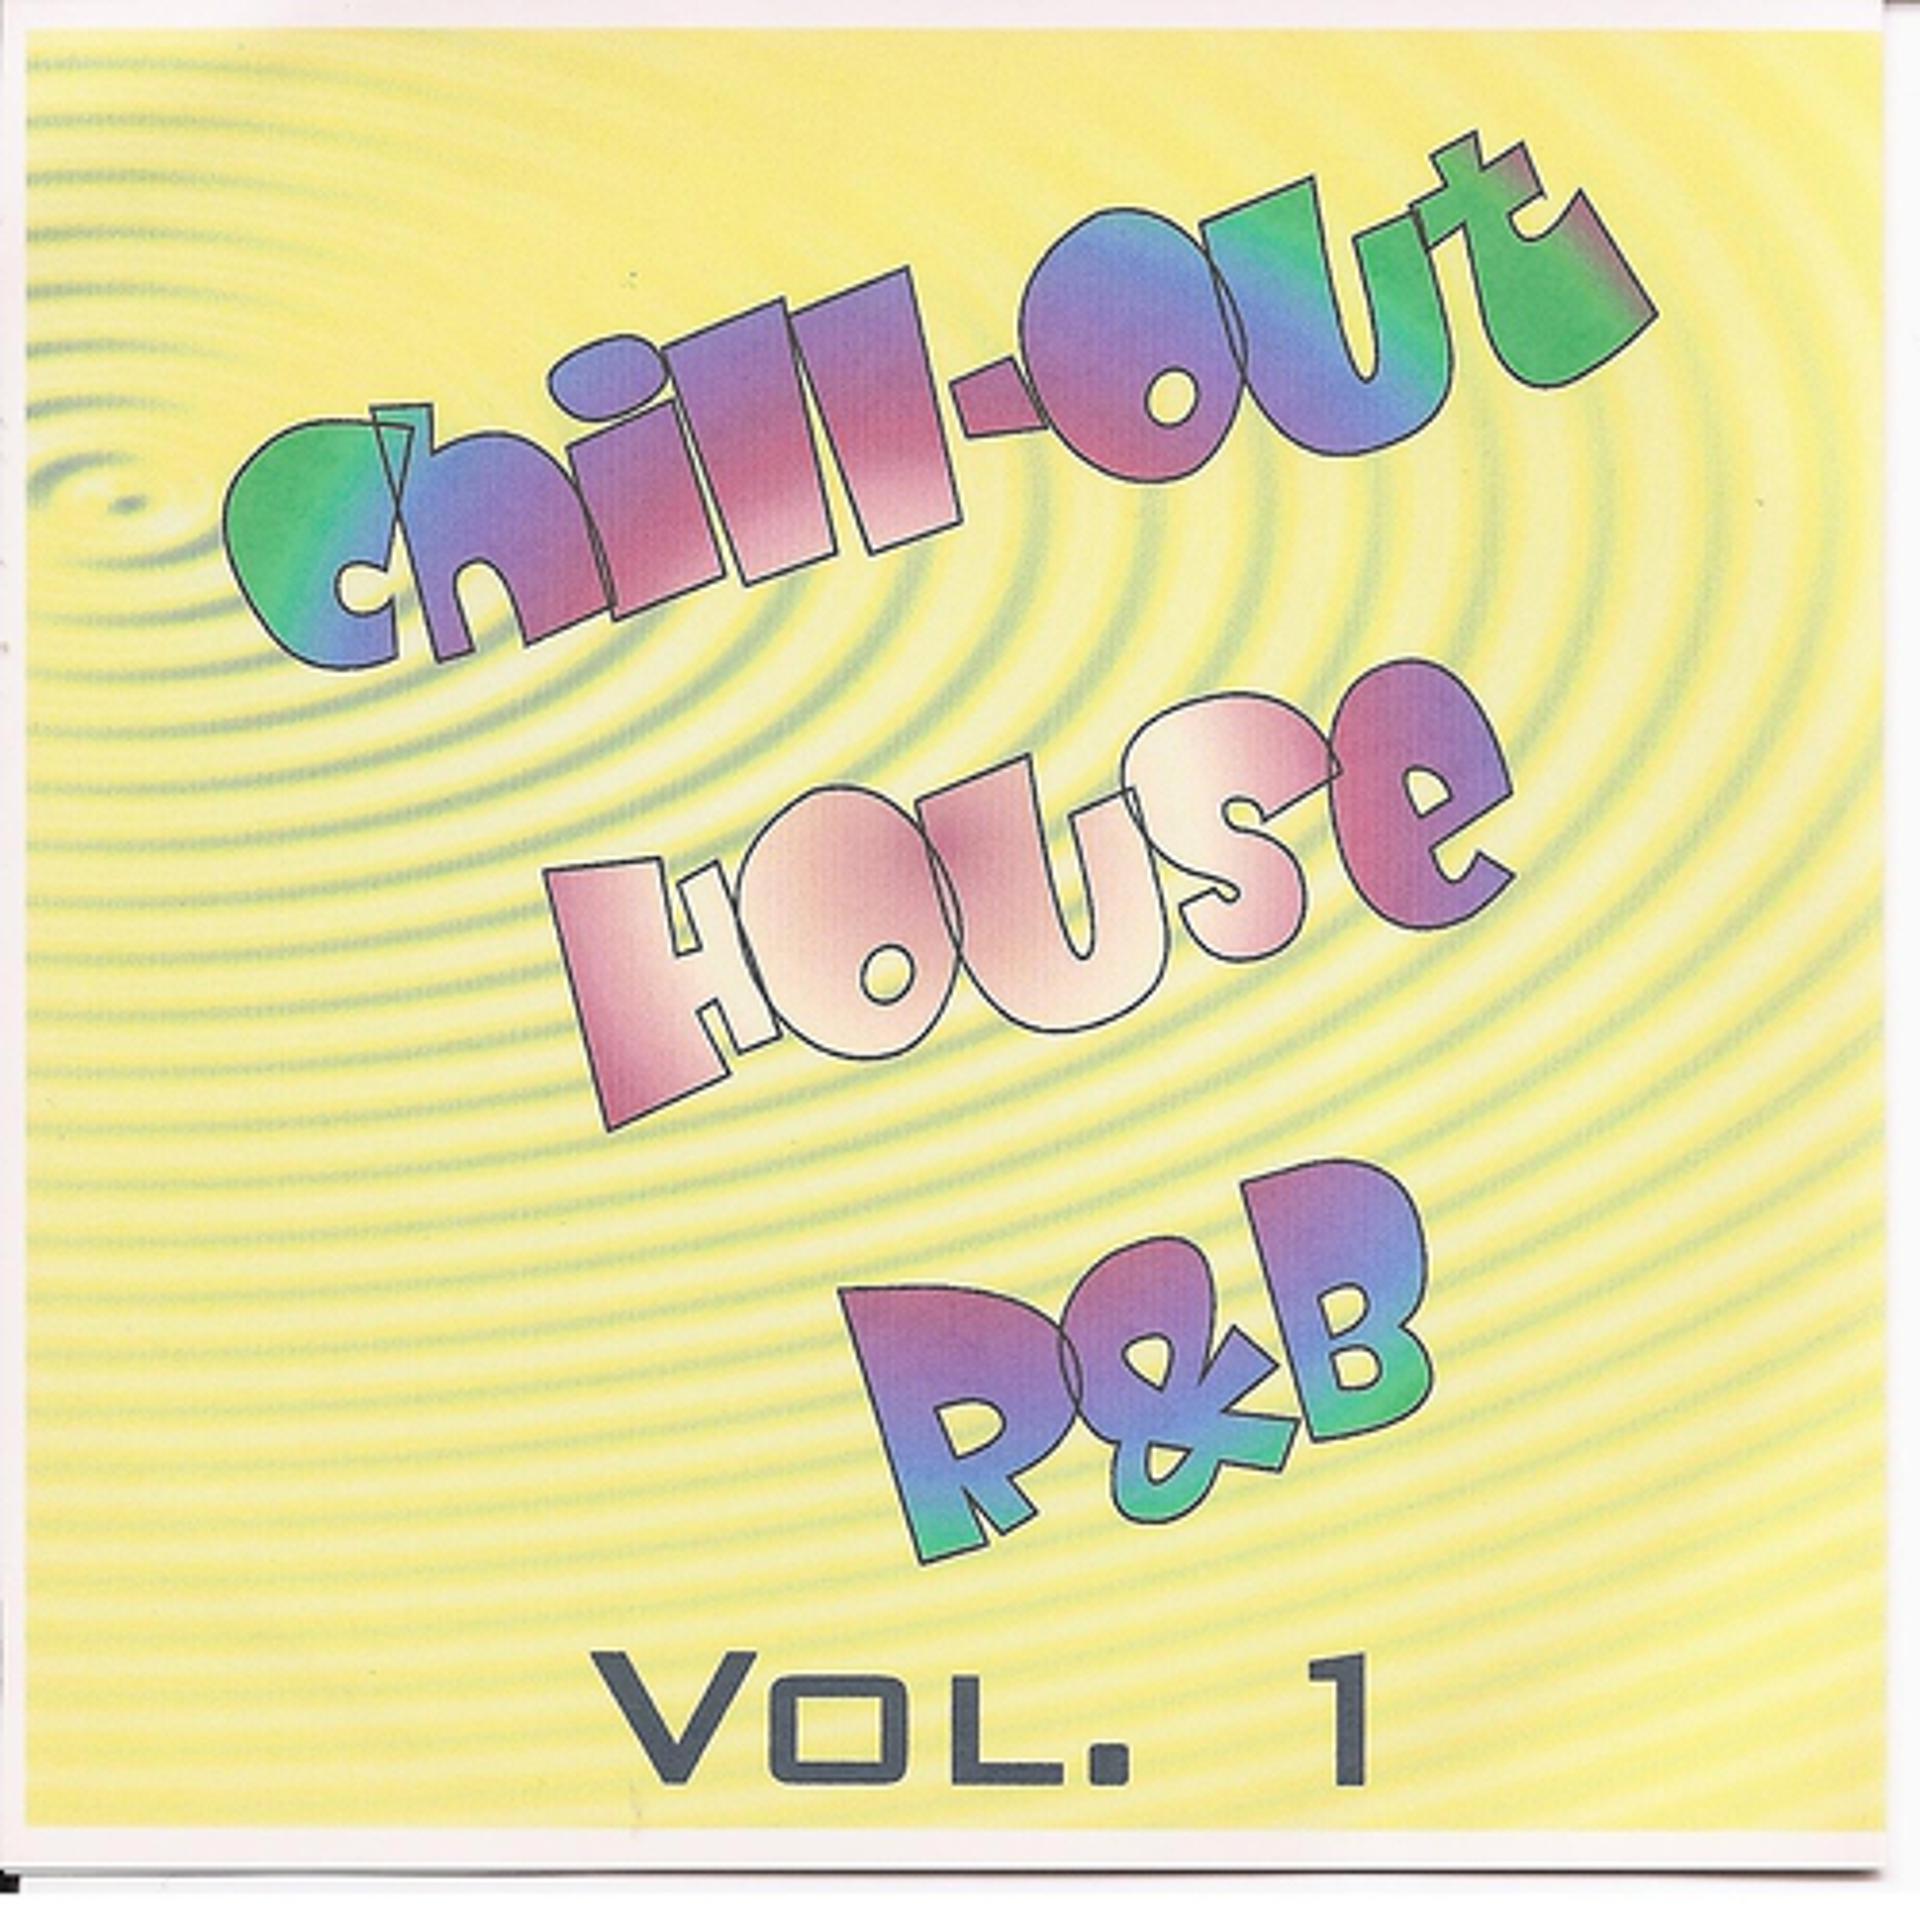 Постер альбома Chill-Out House R&B vol 1